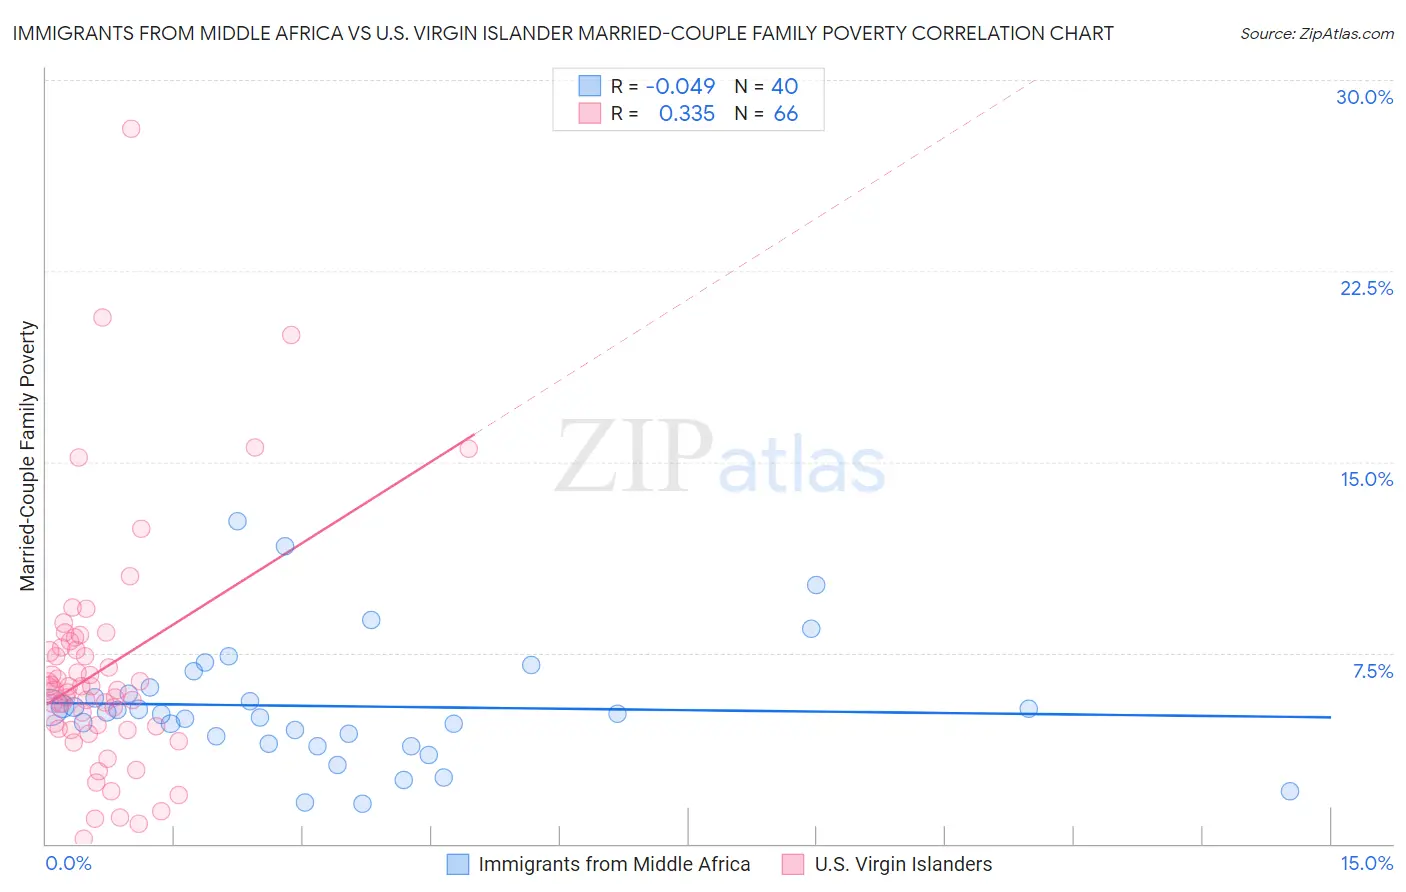 Immigrants from Middle Africa vs U.S. Virgin Islander Married-Couple Family Poverty